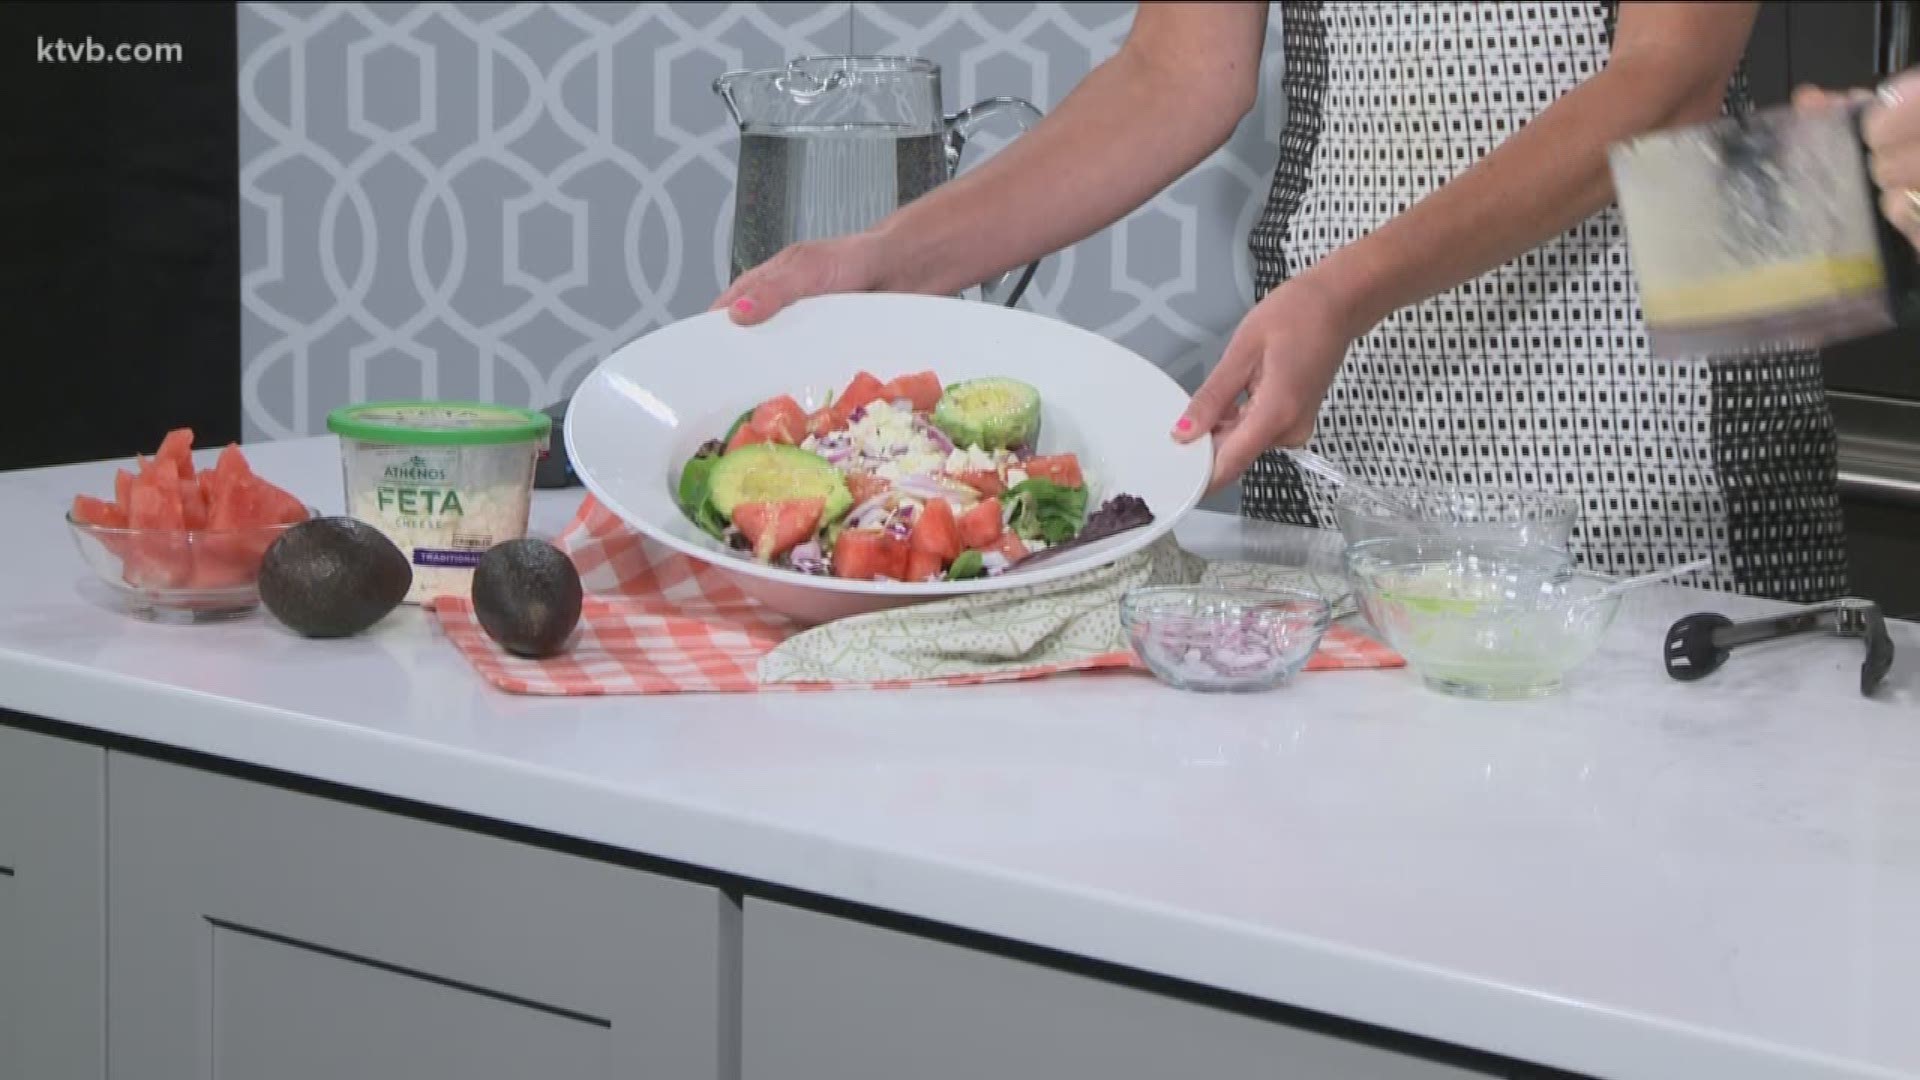 Dietitian Karen Mangum shows us how to prepare this refreshing recipe to help you stay hydrated.